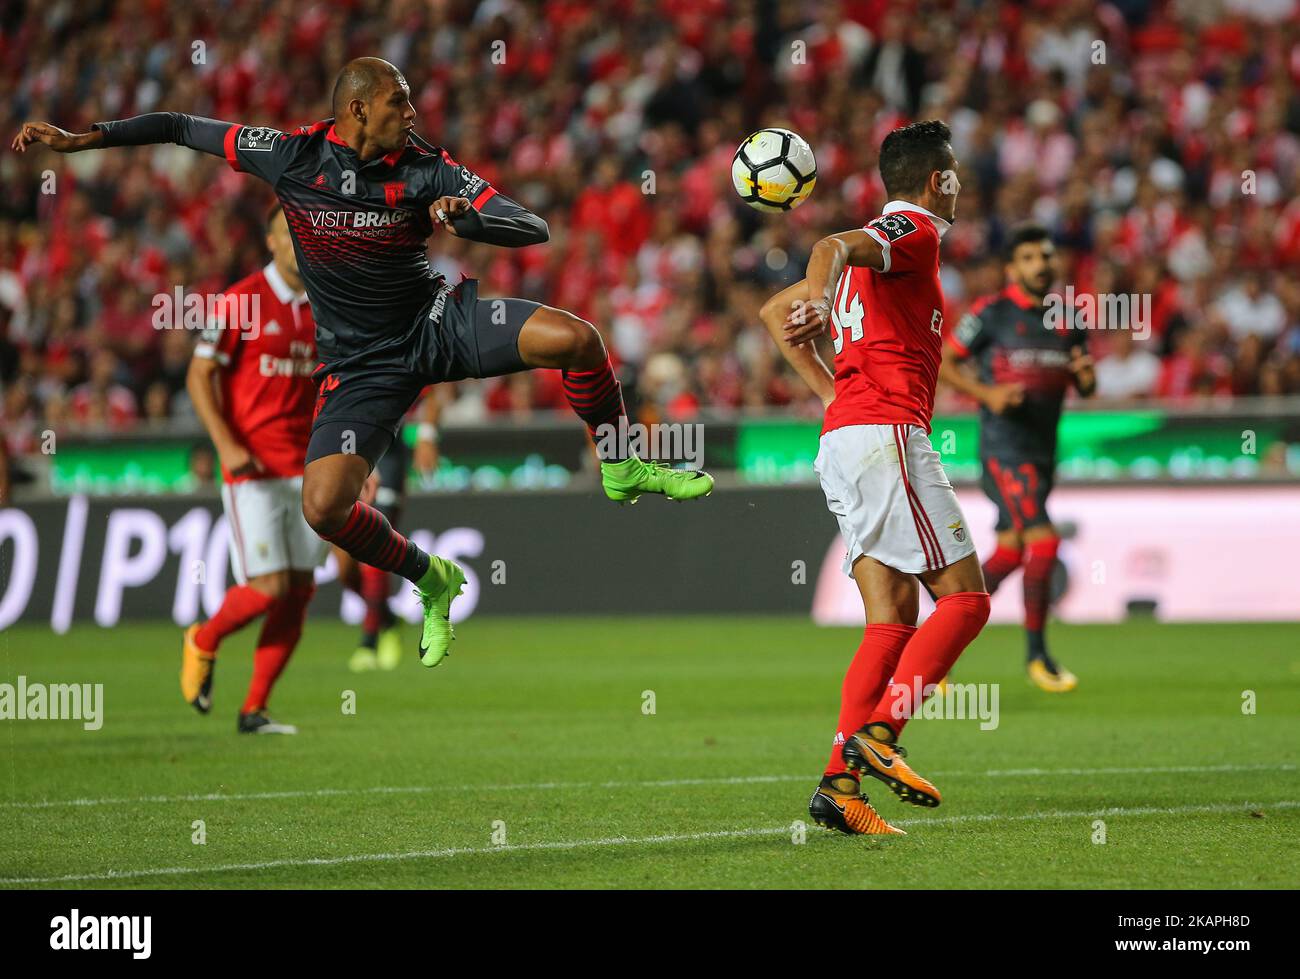 Bragas defender Raul Silva from Brazil (L) and Benficas defender Andre Almeida from Portugal (R) during the Premier League 2017/18 match between SL Benfica v SC Braga, at Luz Stadium in Lisbon on August 9, 2017. (Photo by Bruno Barros / DPI / NurPhoto) *** Please Use Credit from Credit Field *** Stock Photo